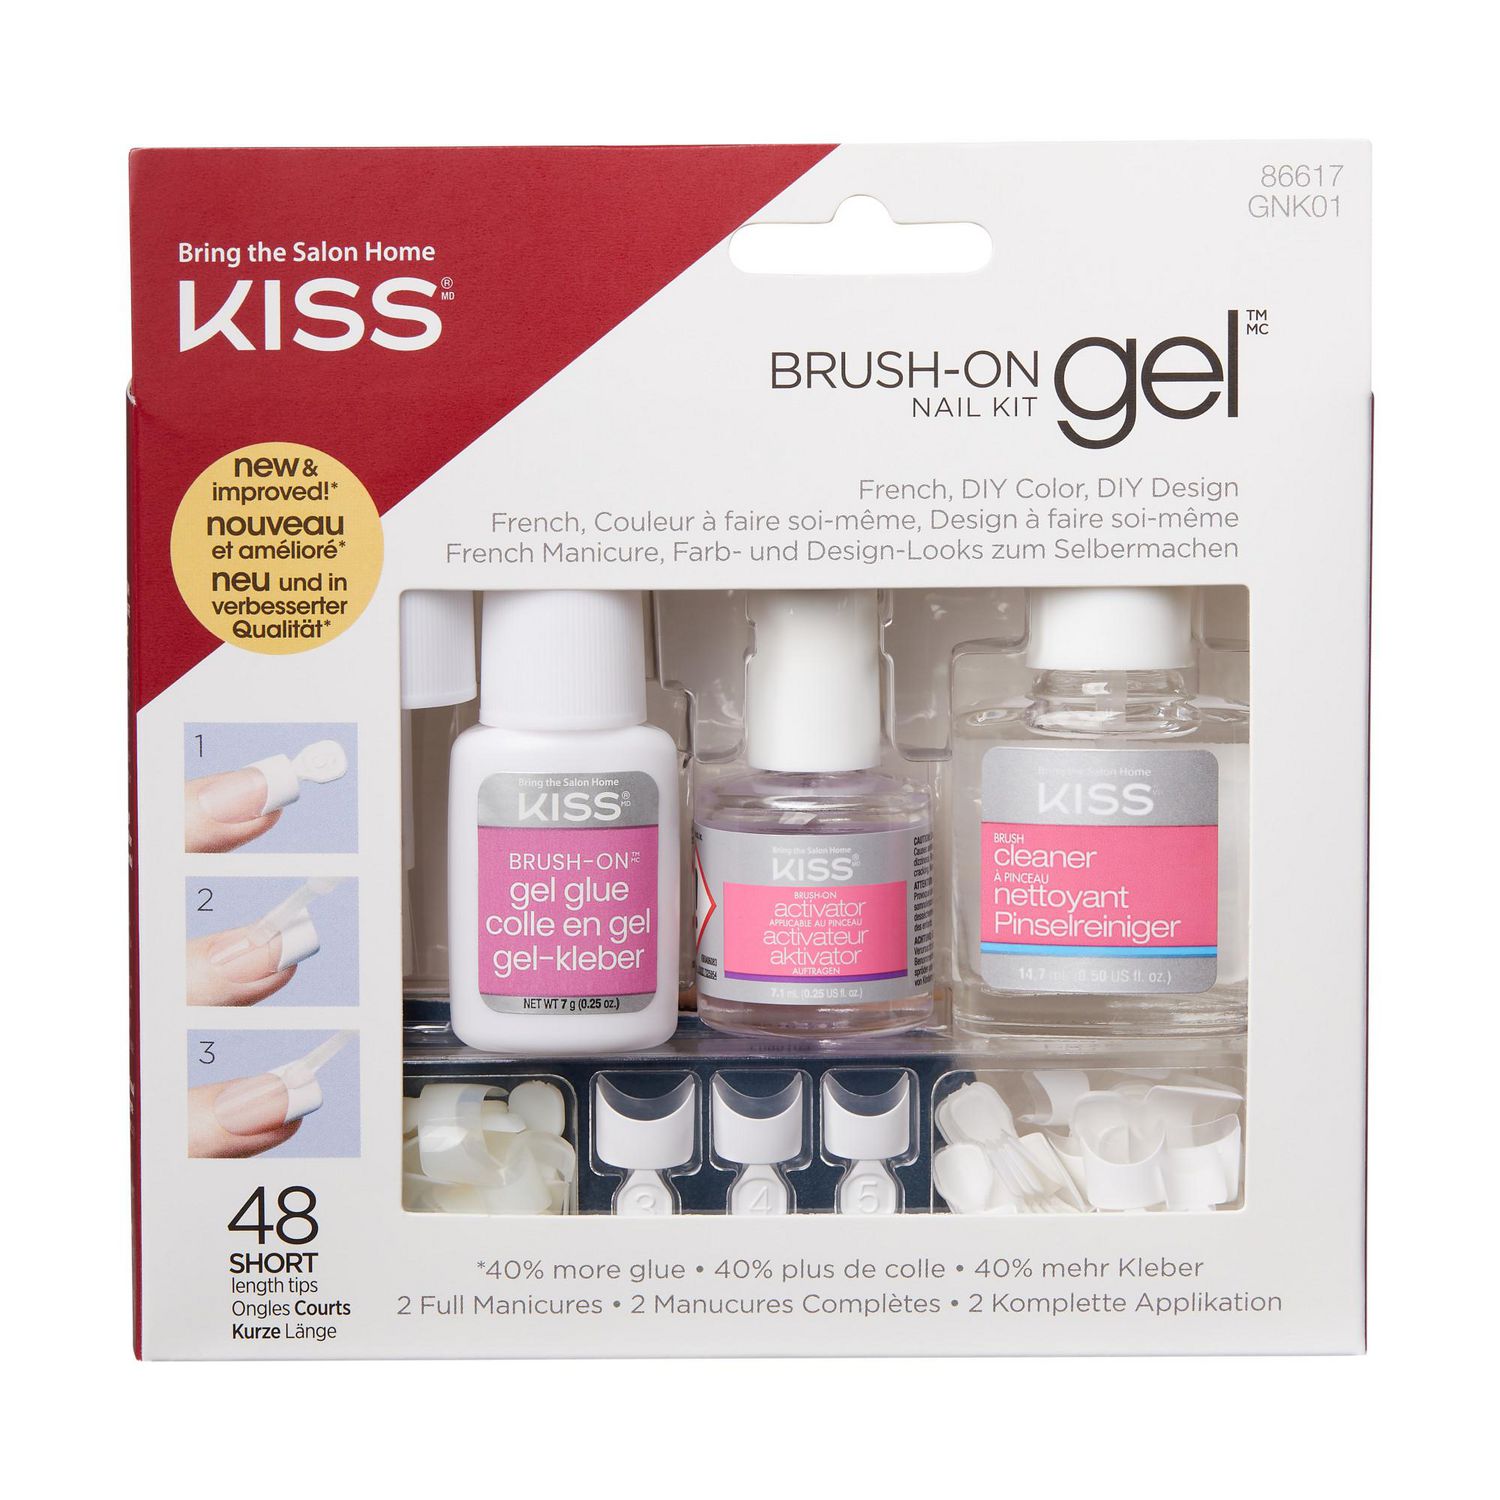 PEACECOLOR Acrylic Nail Set, Acrylic Powder for Nails and Liquid Set, with  3 Colours, Acrylic Powder, Acrylic Nails, Starter Set, Complete for  Beginners, Acrylic Powder Nails Kit : Amazon.de: Beauty